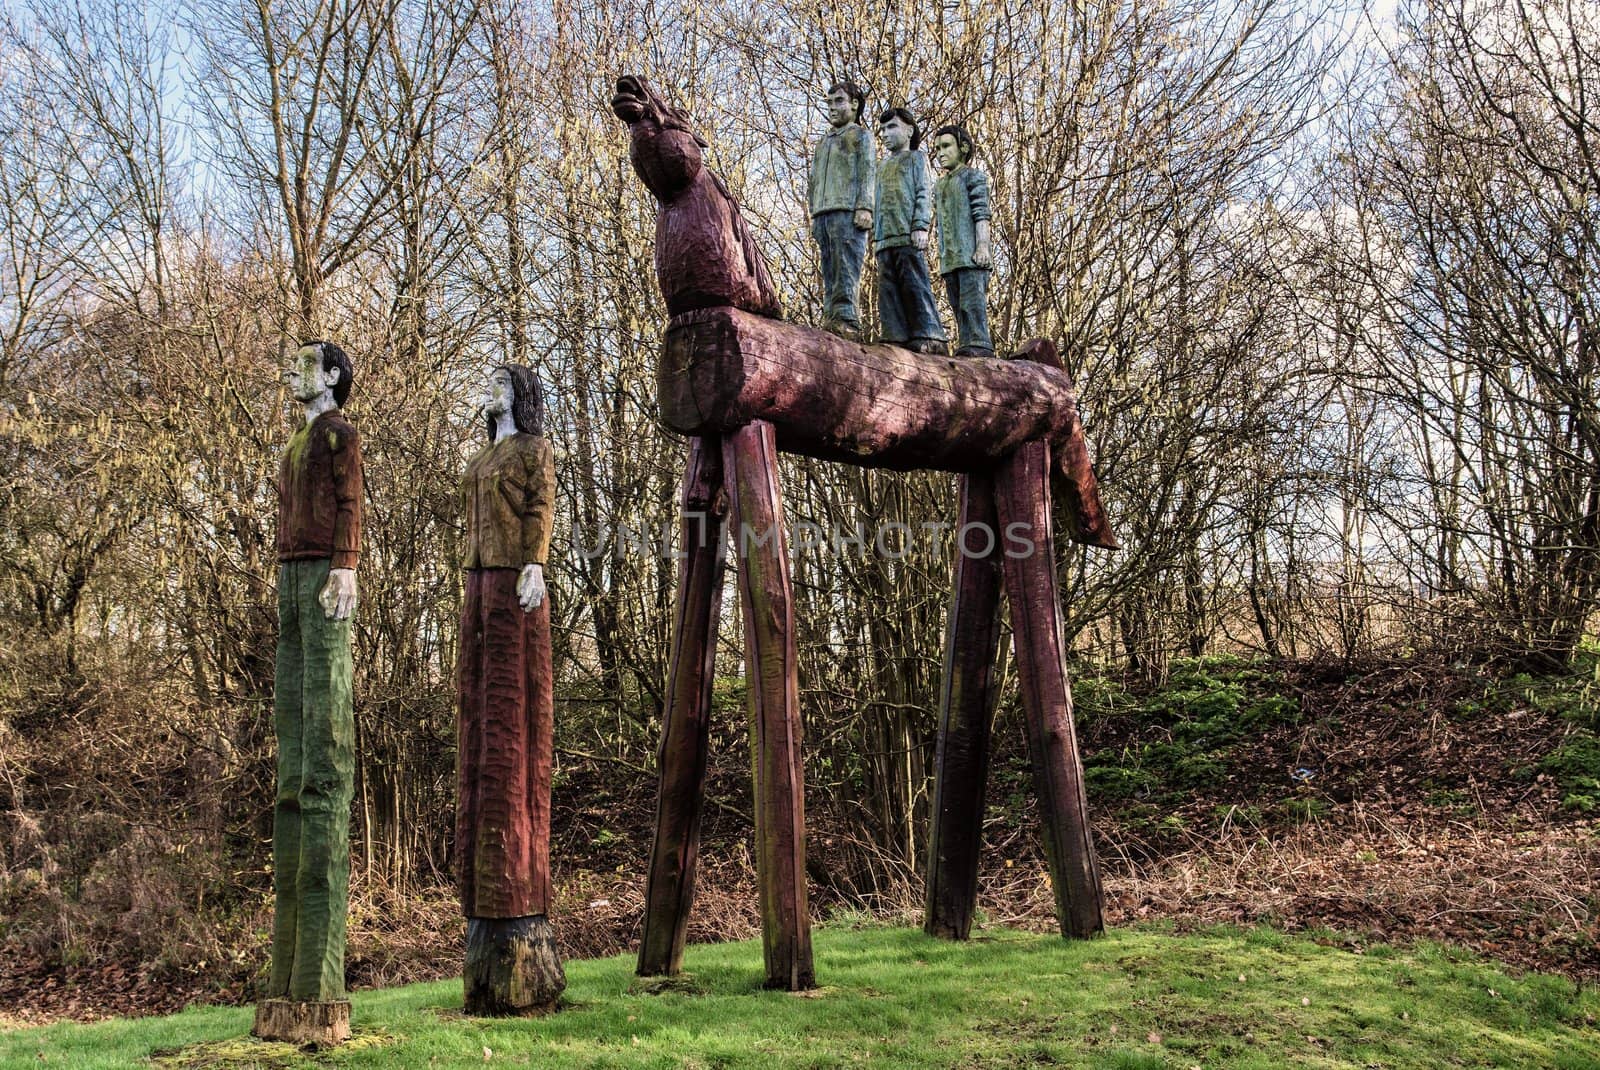 wooden horse by Jez22